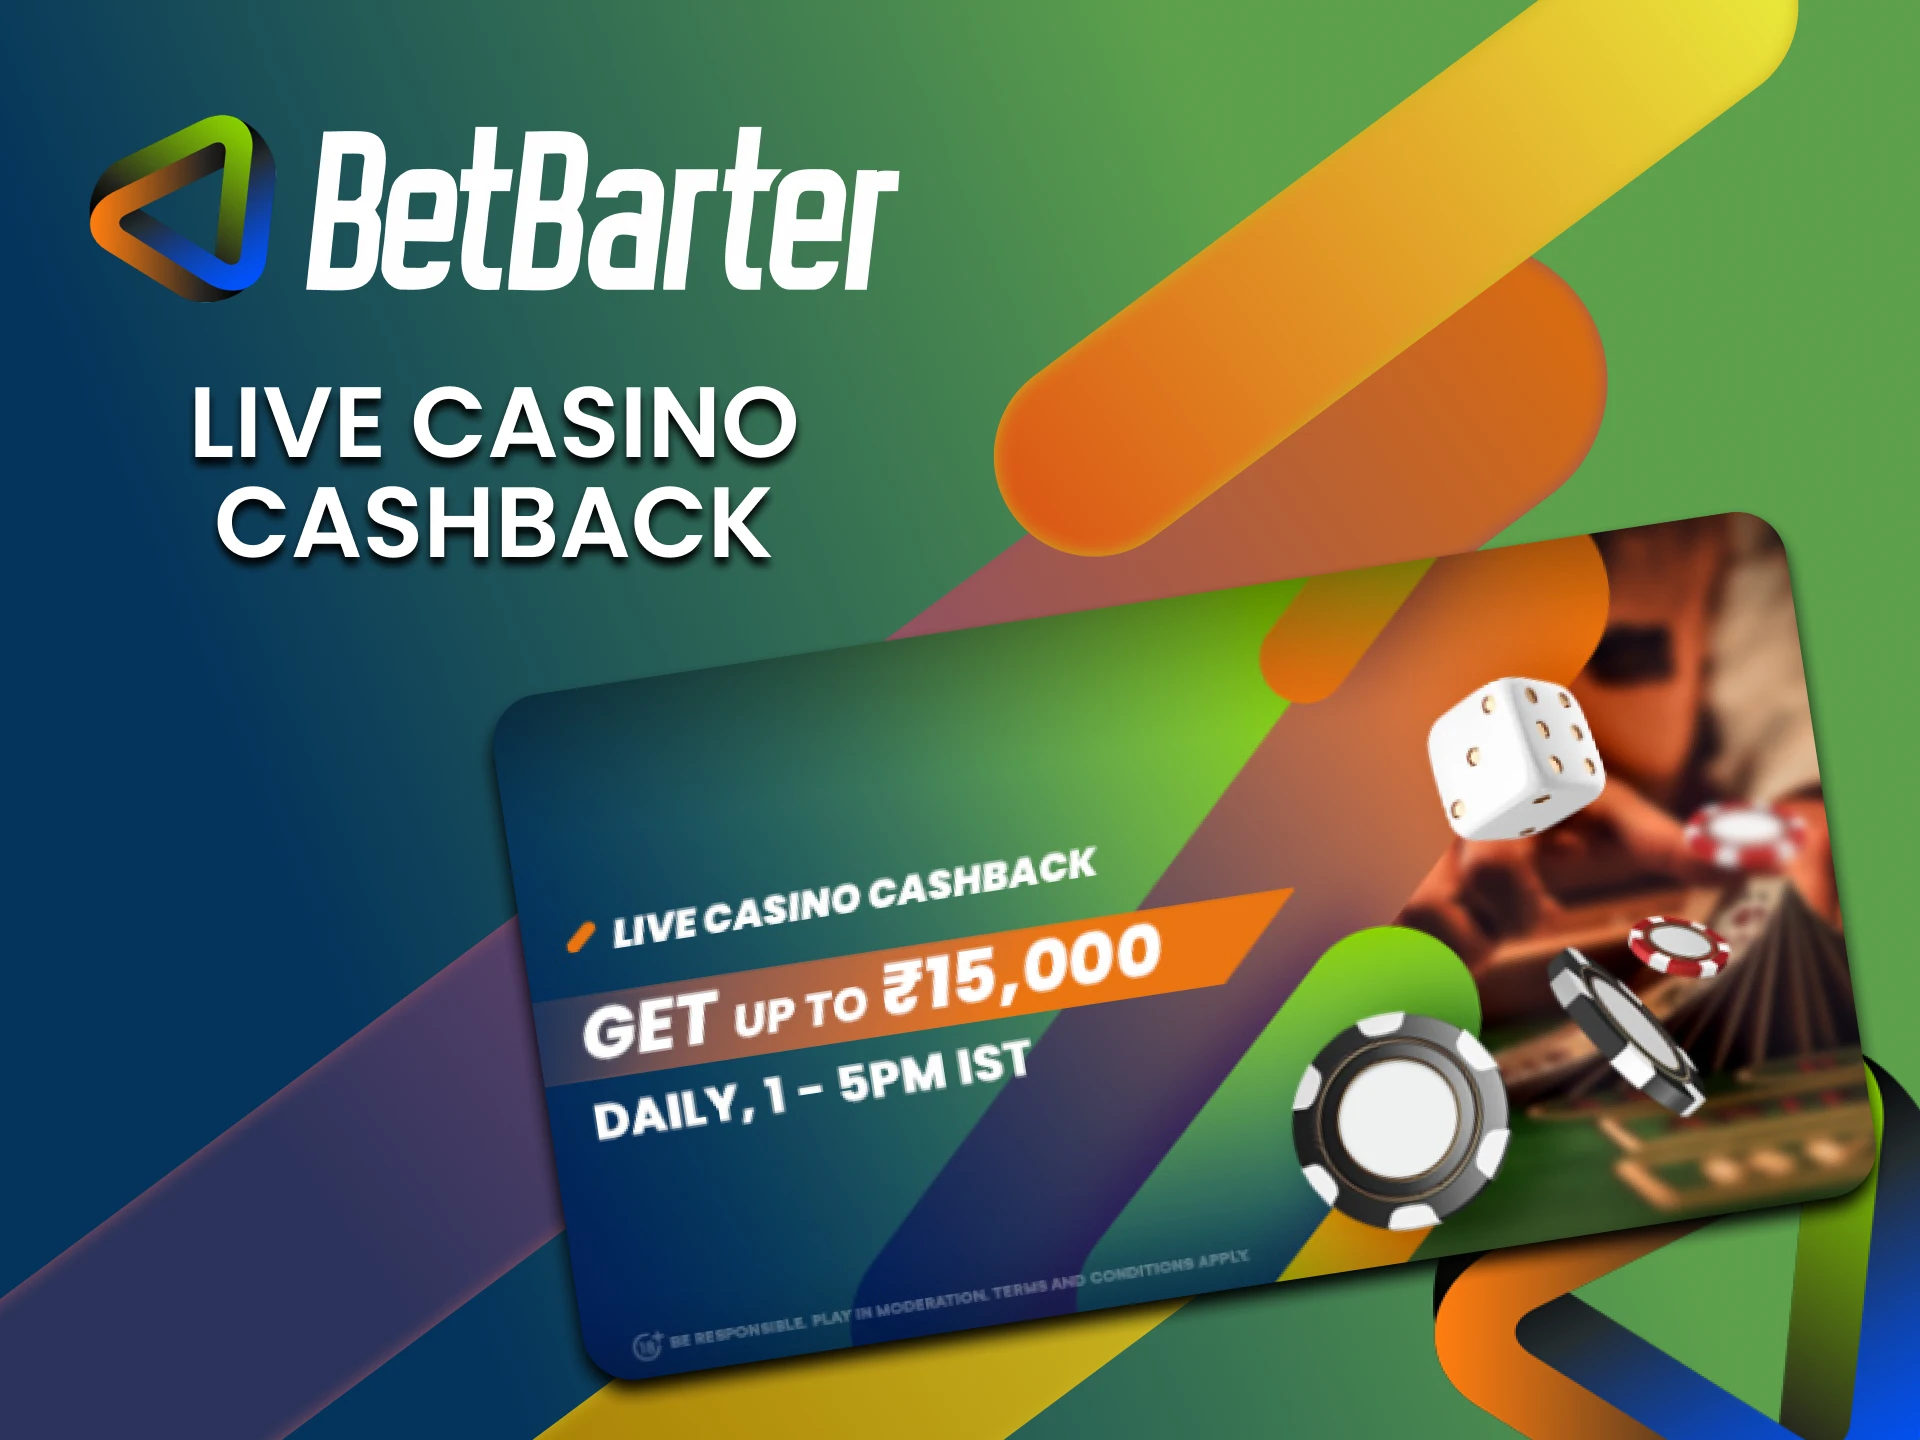 BetBarter gives a bonus in the form of cashback.